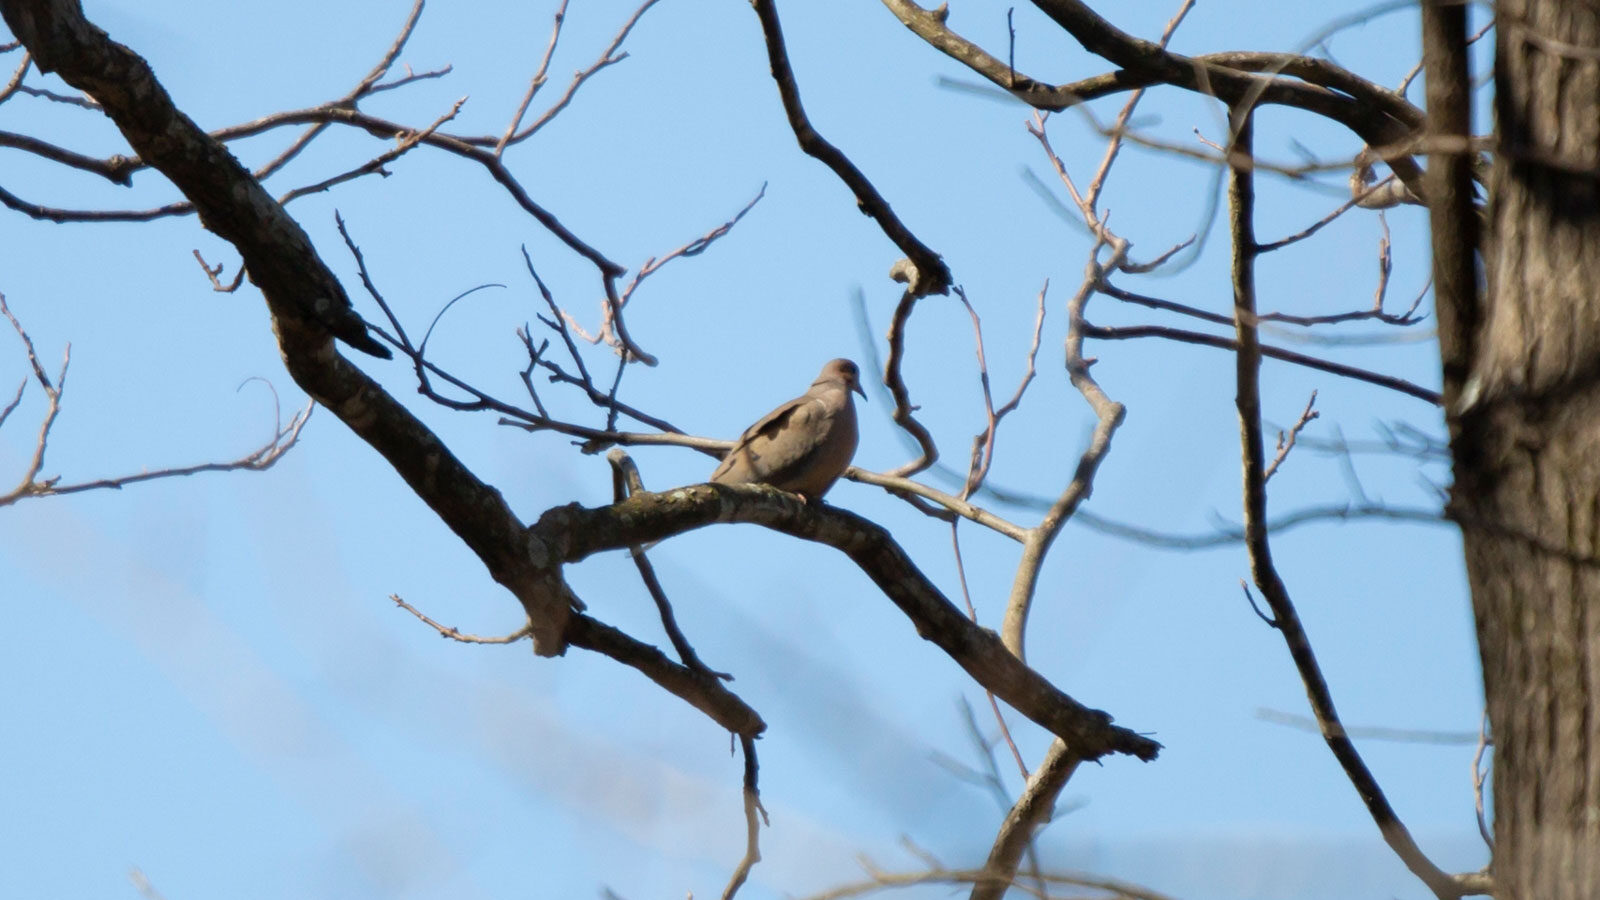 Mourning dove looking around from its perch on a tree branch